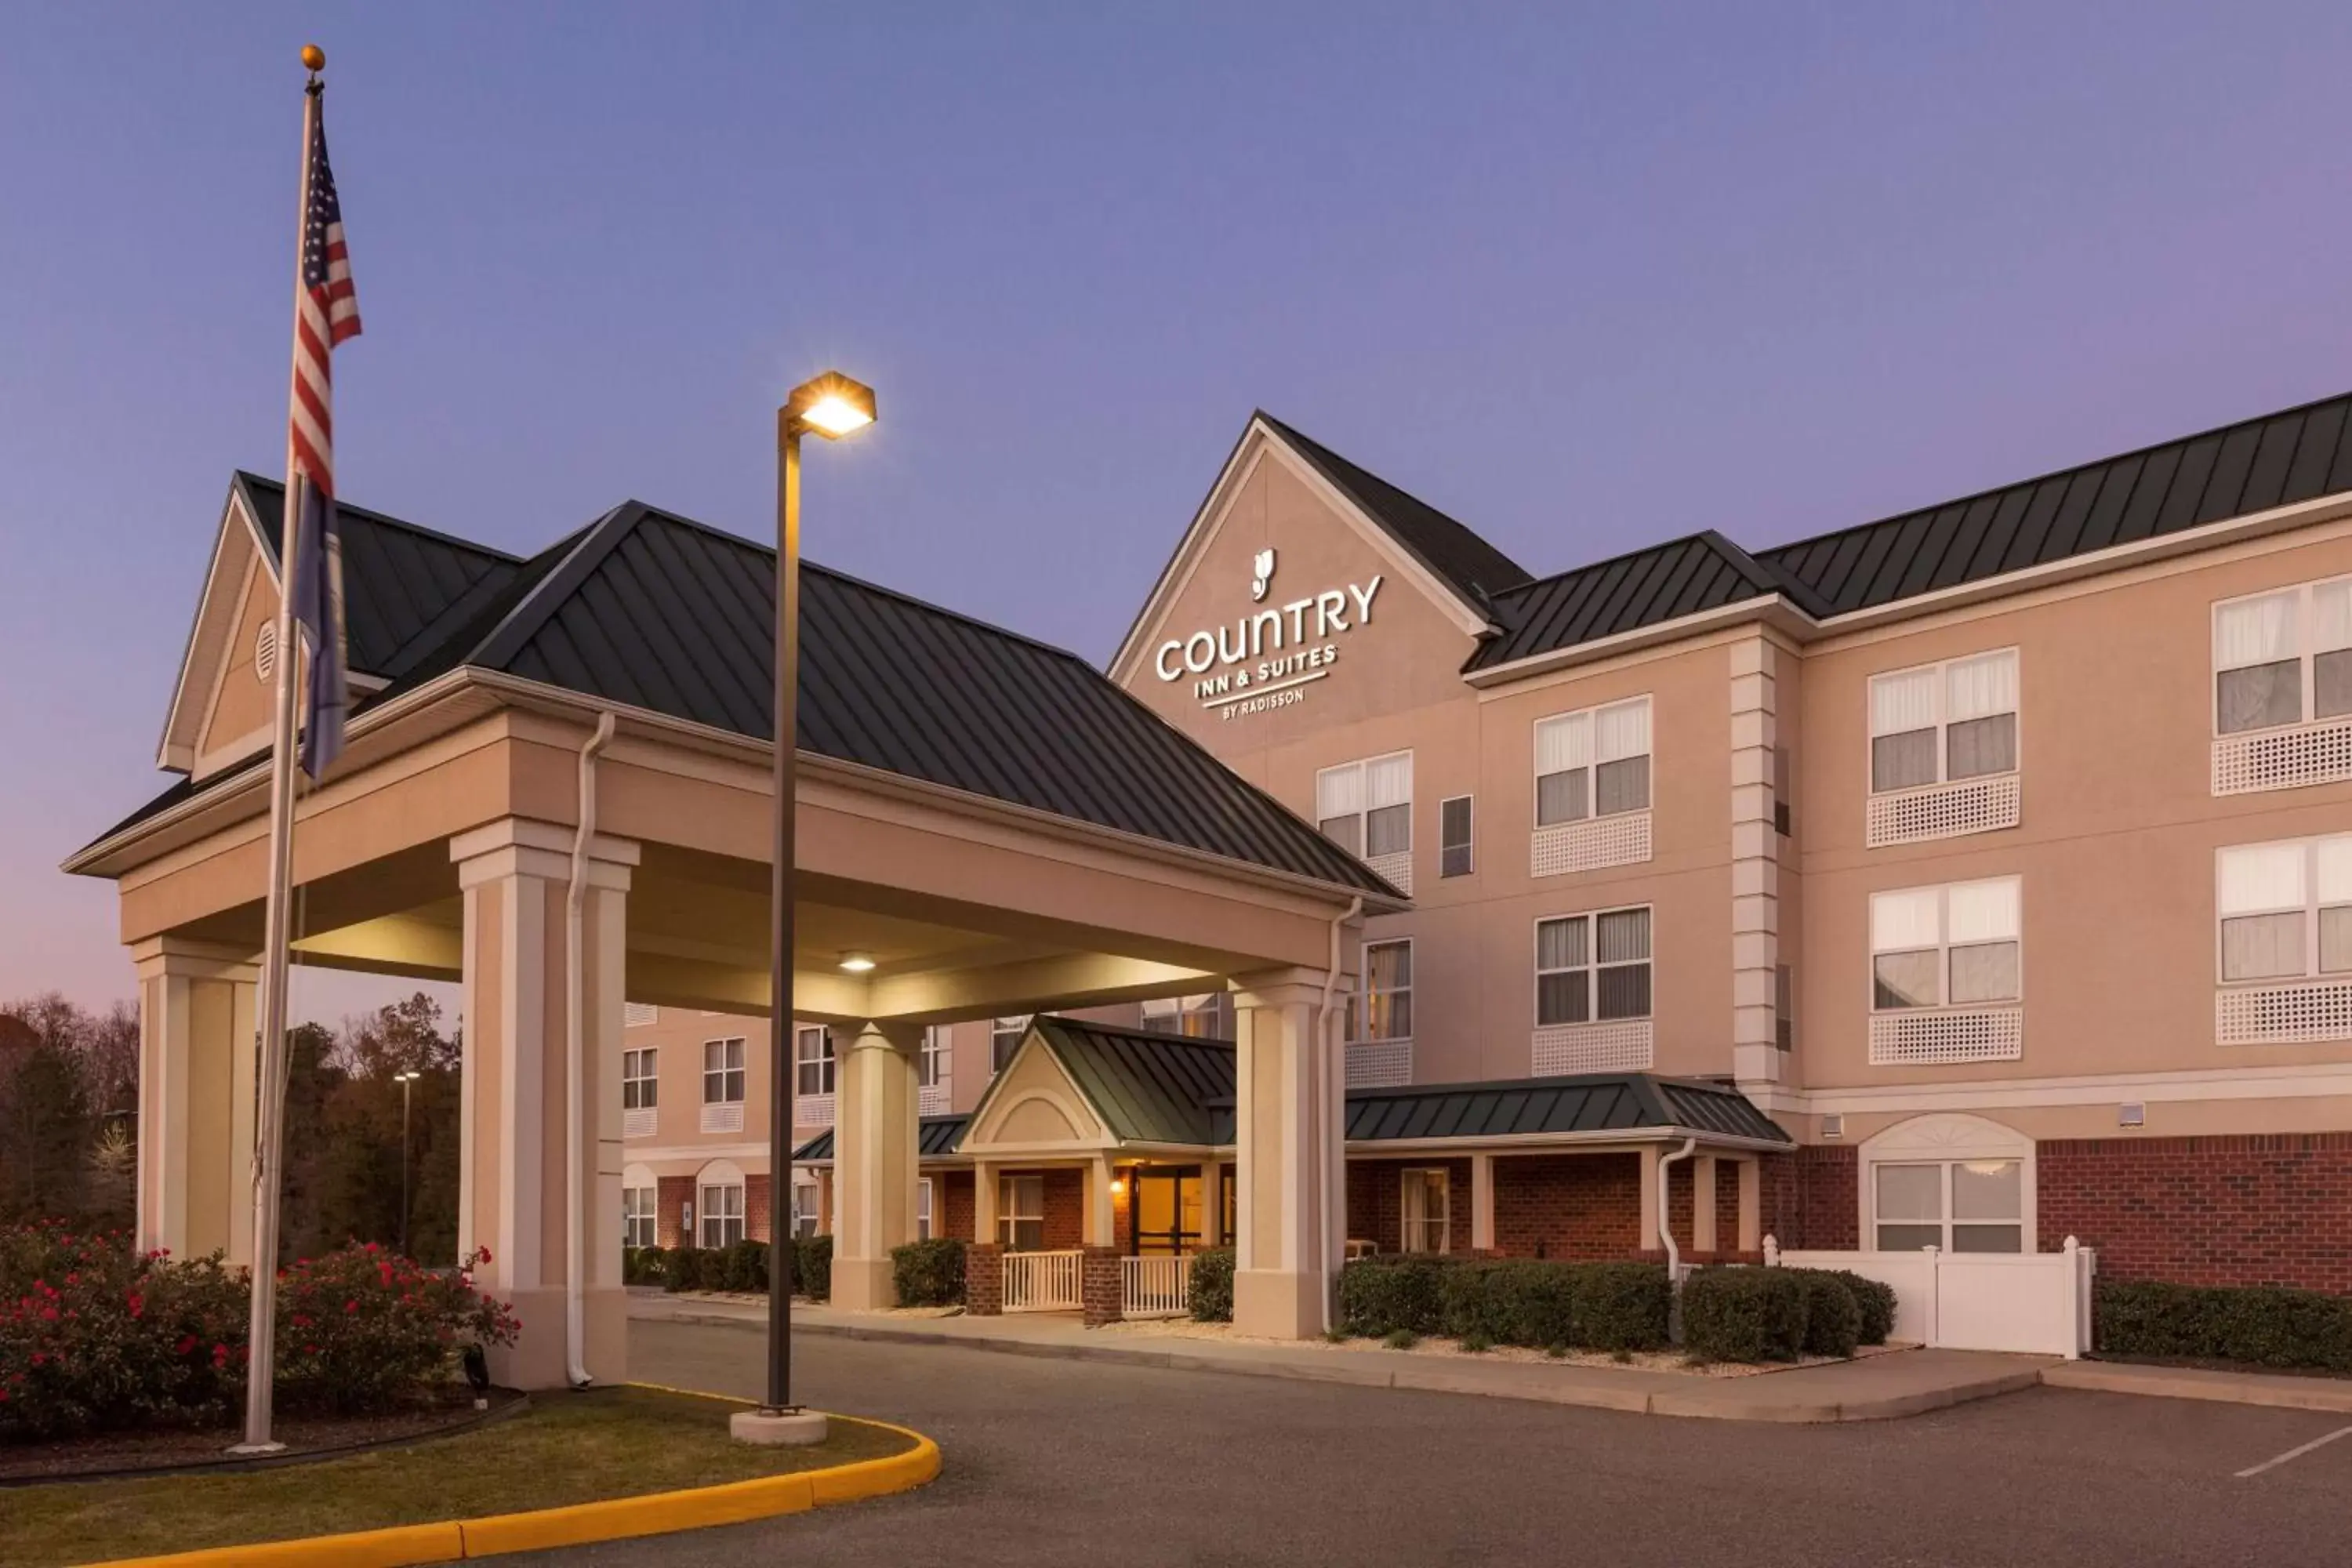 Property building in Country Inn & Suites by Radisson, Doswell (Kings Dominion), VA